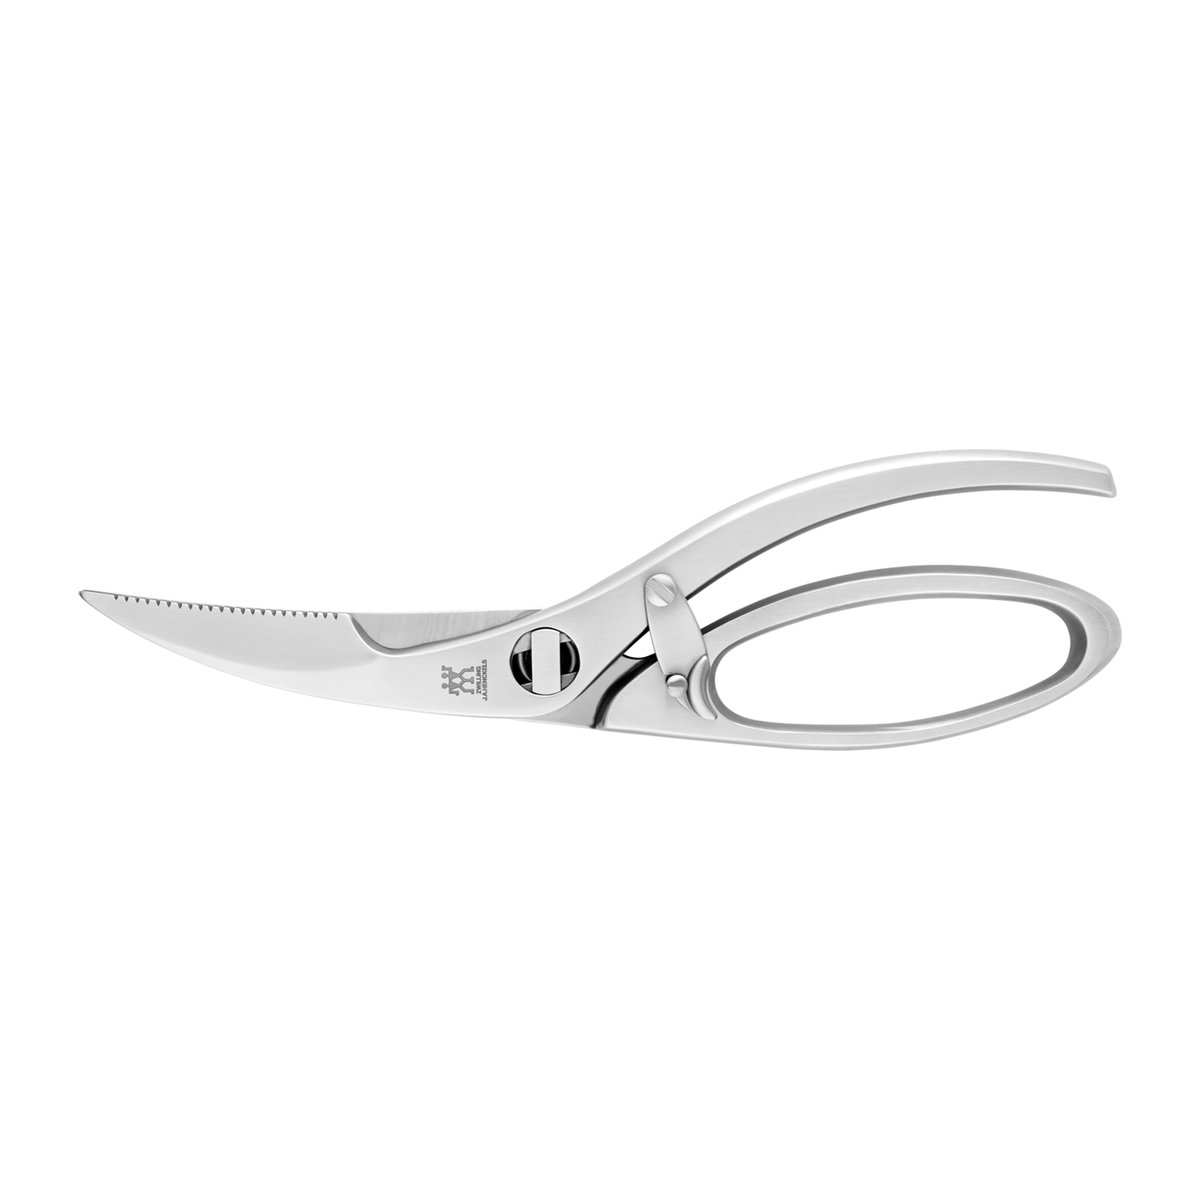 Zwilling Zwilling Twin Select fjerkræsaks 23,5 cm